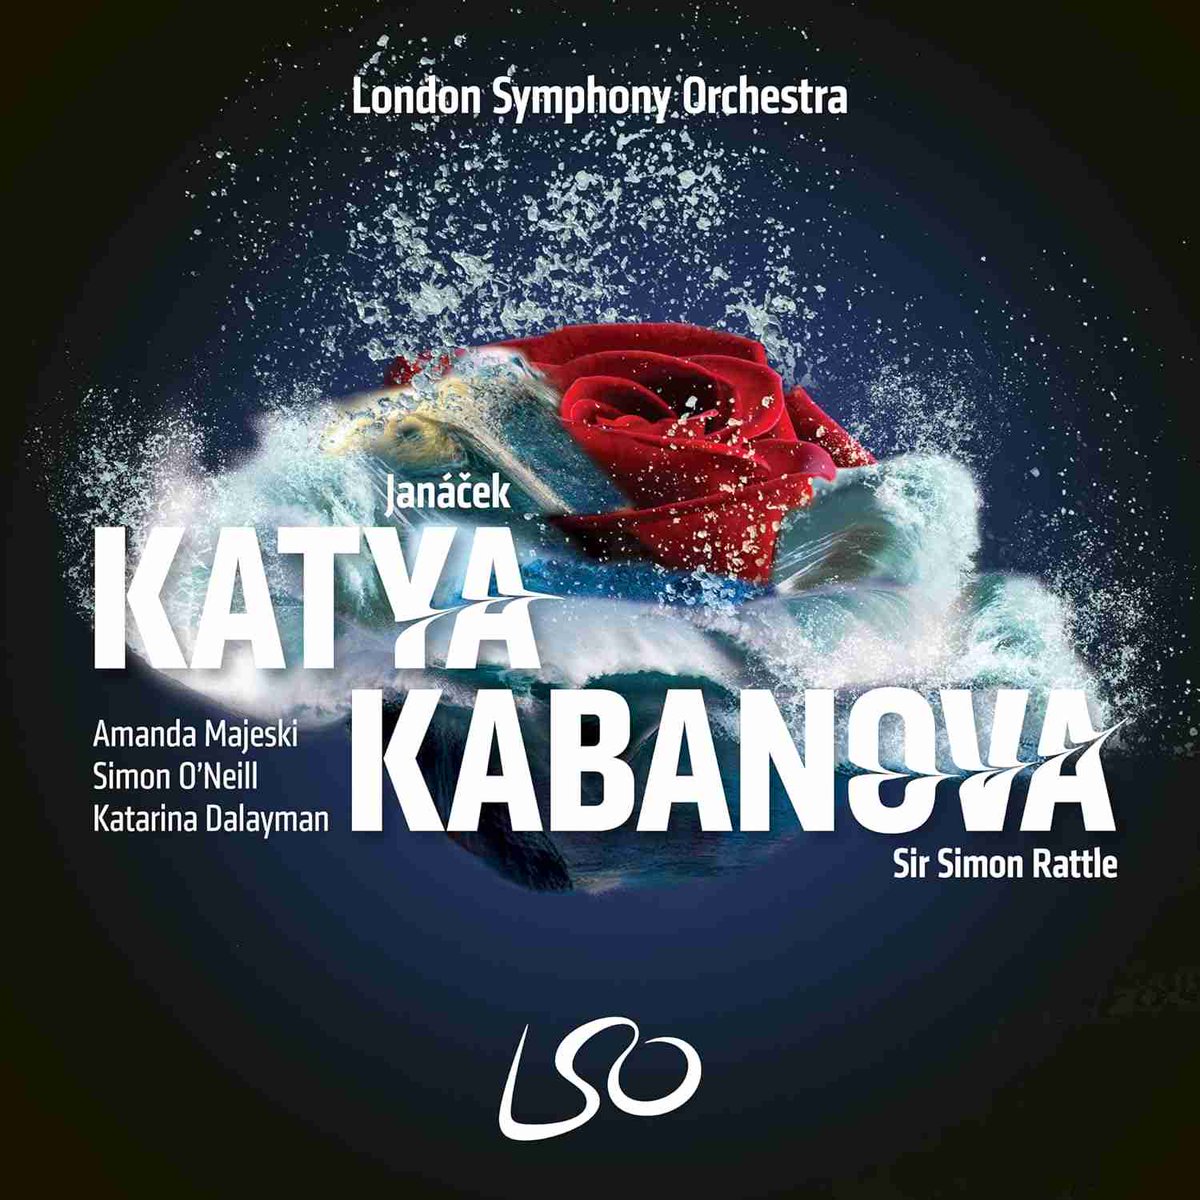 #CDReview @londonsymphony @SirSimonRattle Káťa Kabanová - Rattle with the LSO Simon O’Neill uses plenty of dynamic variation and is suitably impassioned as Boris, if rather more Wagnerian than the fresh-voiced 25 year old Petr Dvorský. bit.ly/3VwSZKA